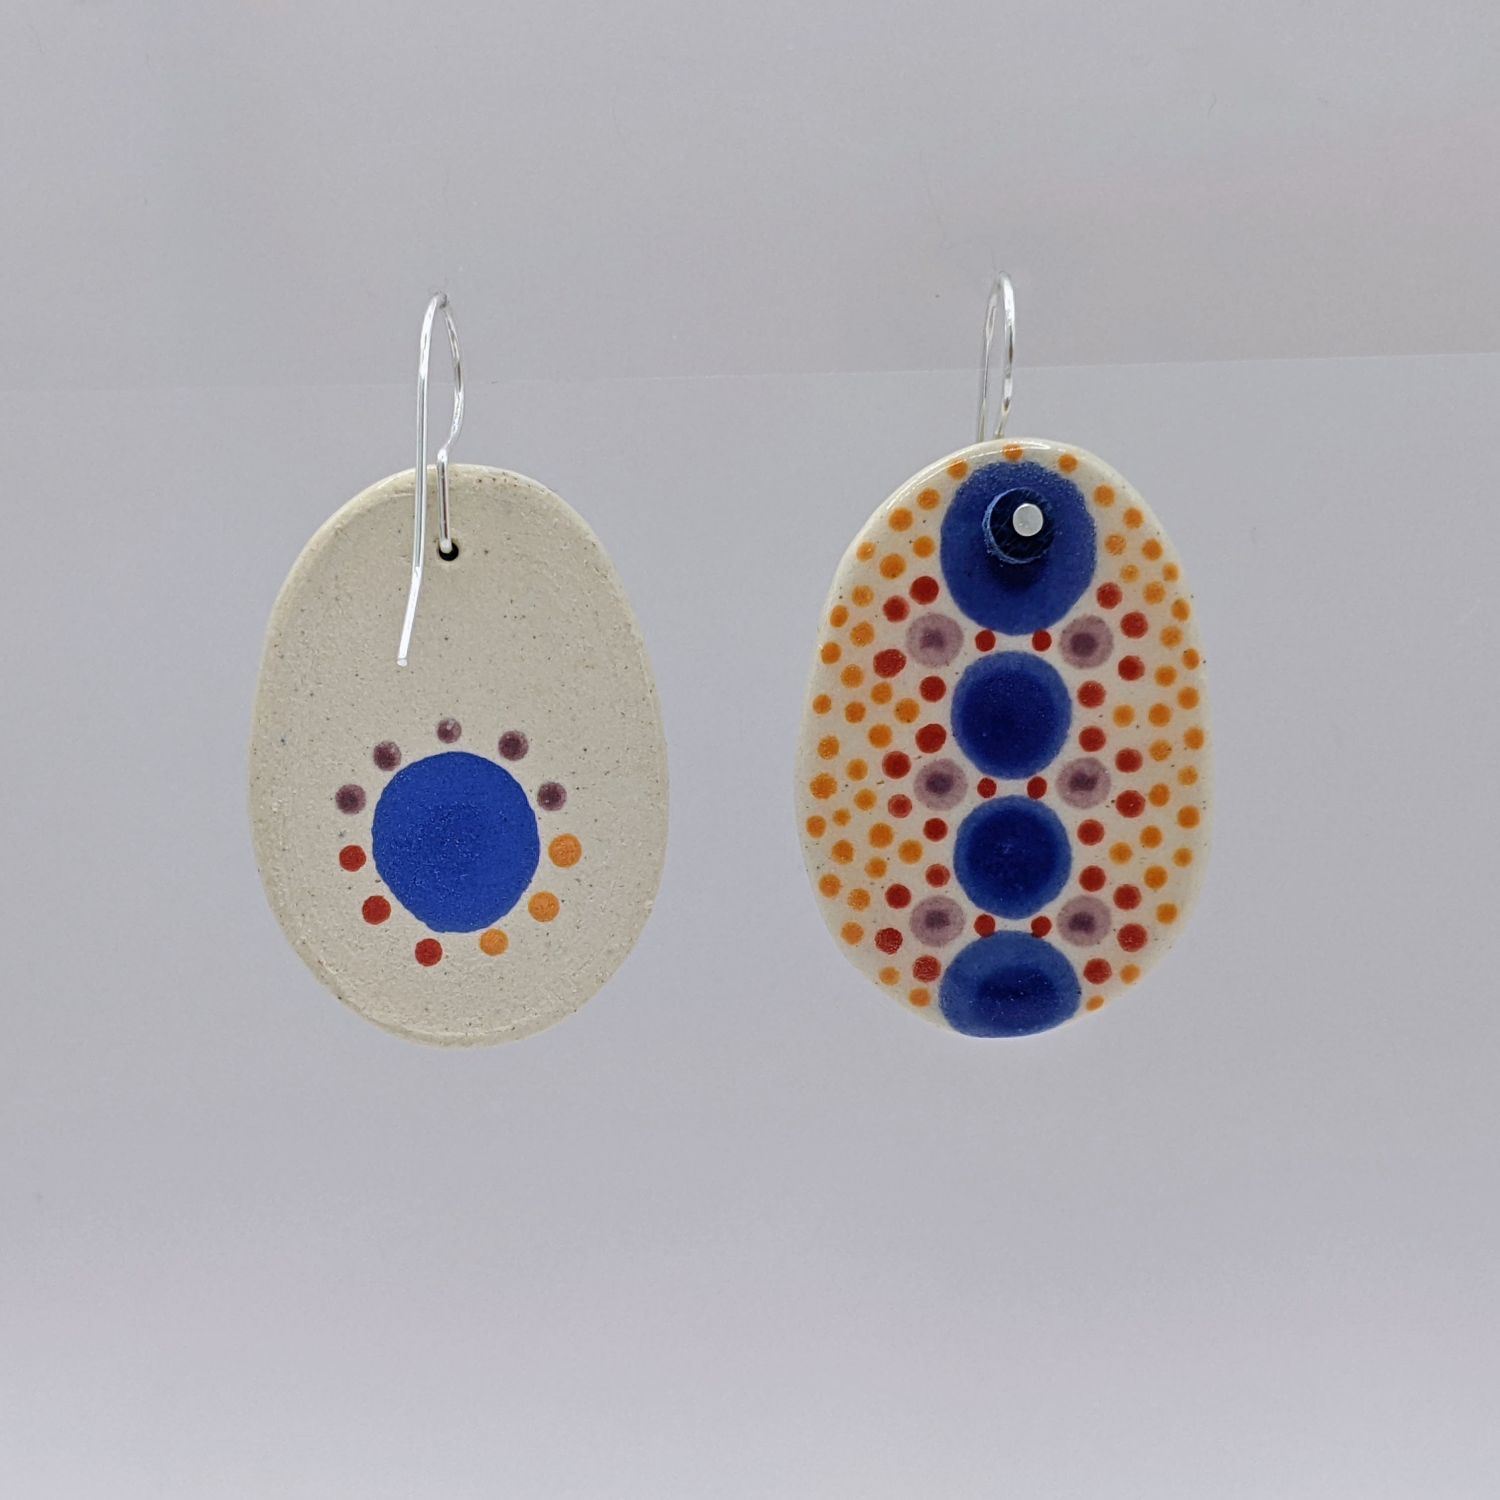 Here and Here: Blue and Multi-Coloured Dotted Ceramic Disc Earrings Product Image 2 of 2